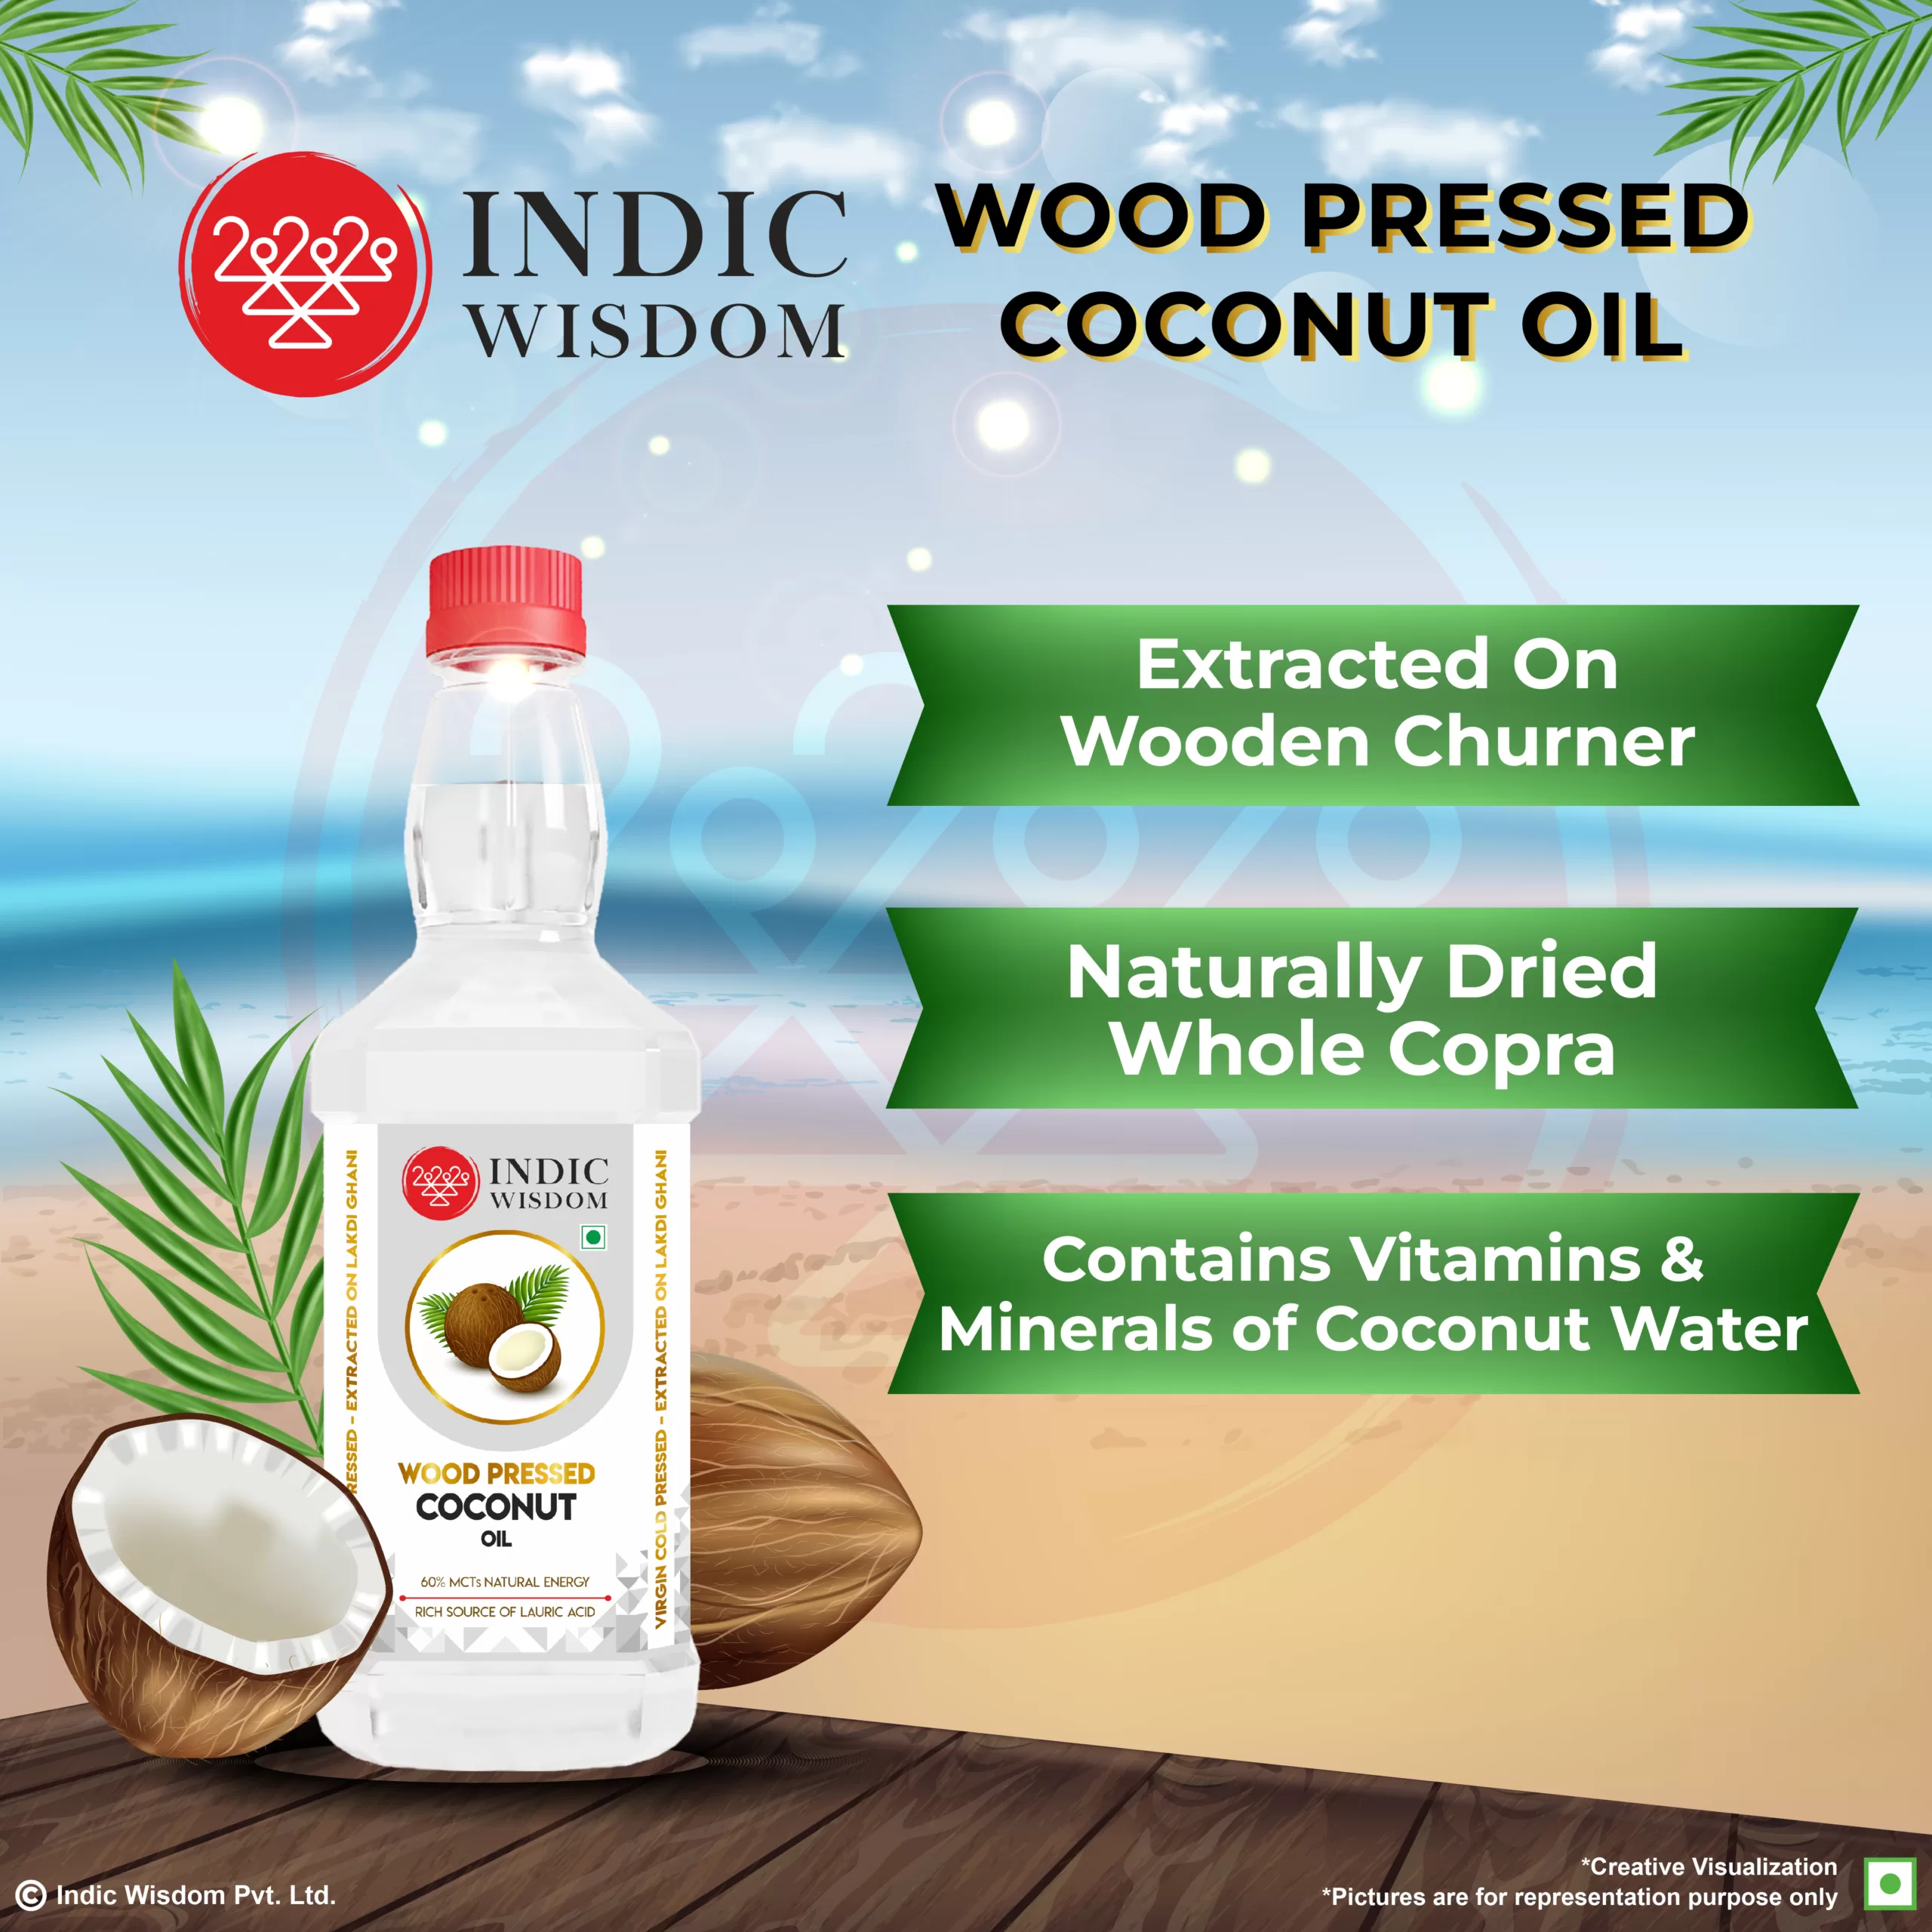 Benefits of wood pressed coconut oil